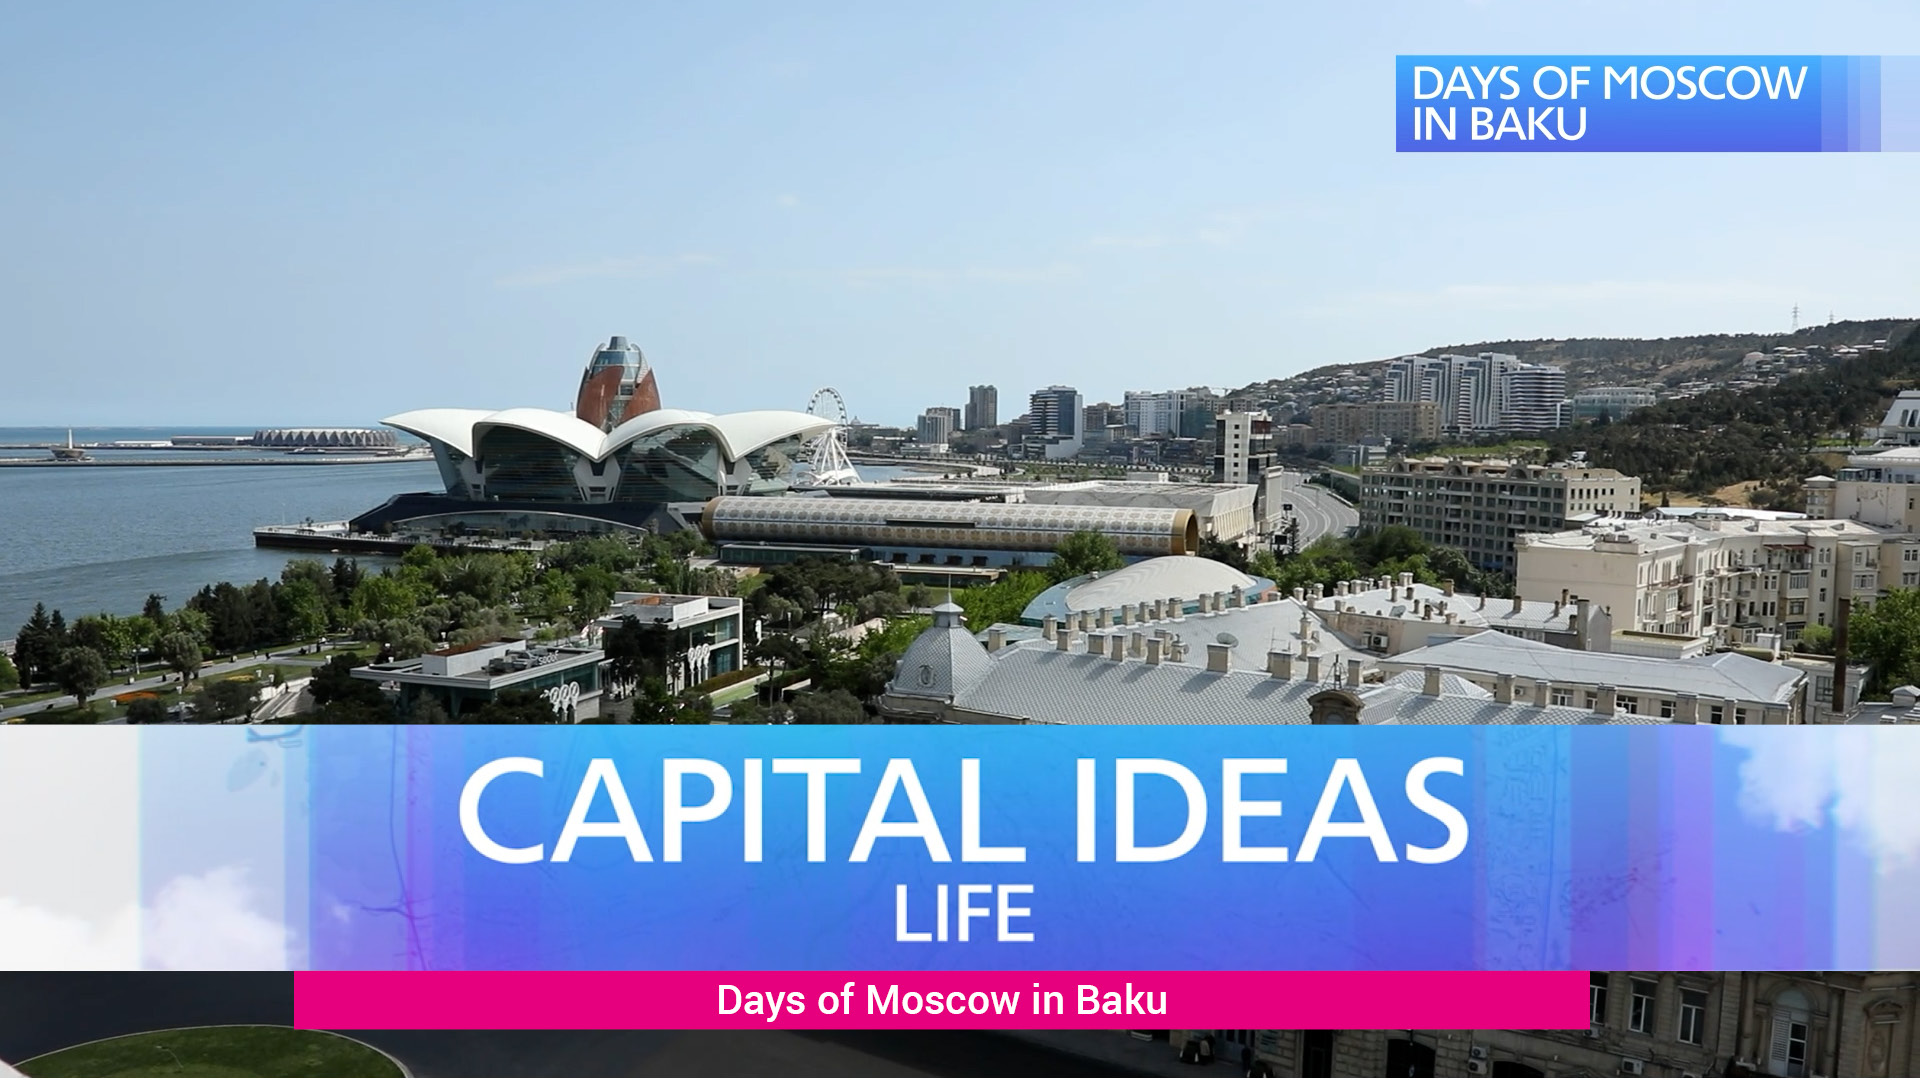 Capital Ideas Life. Days of Moscow in Baku.